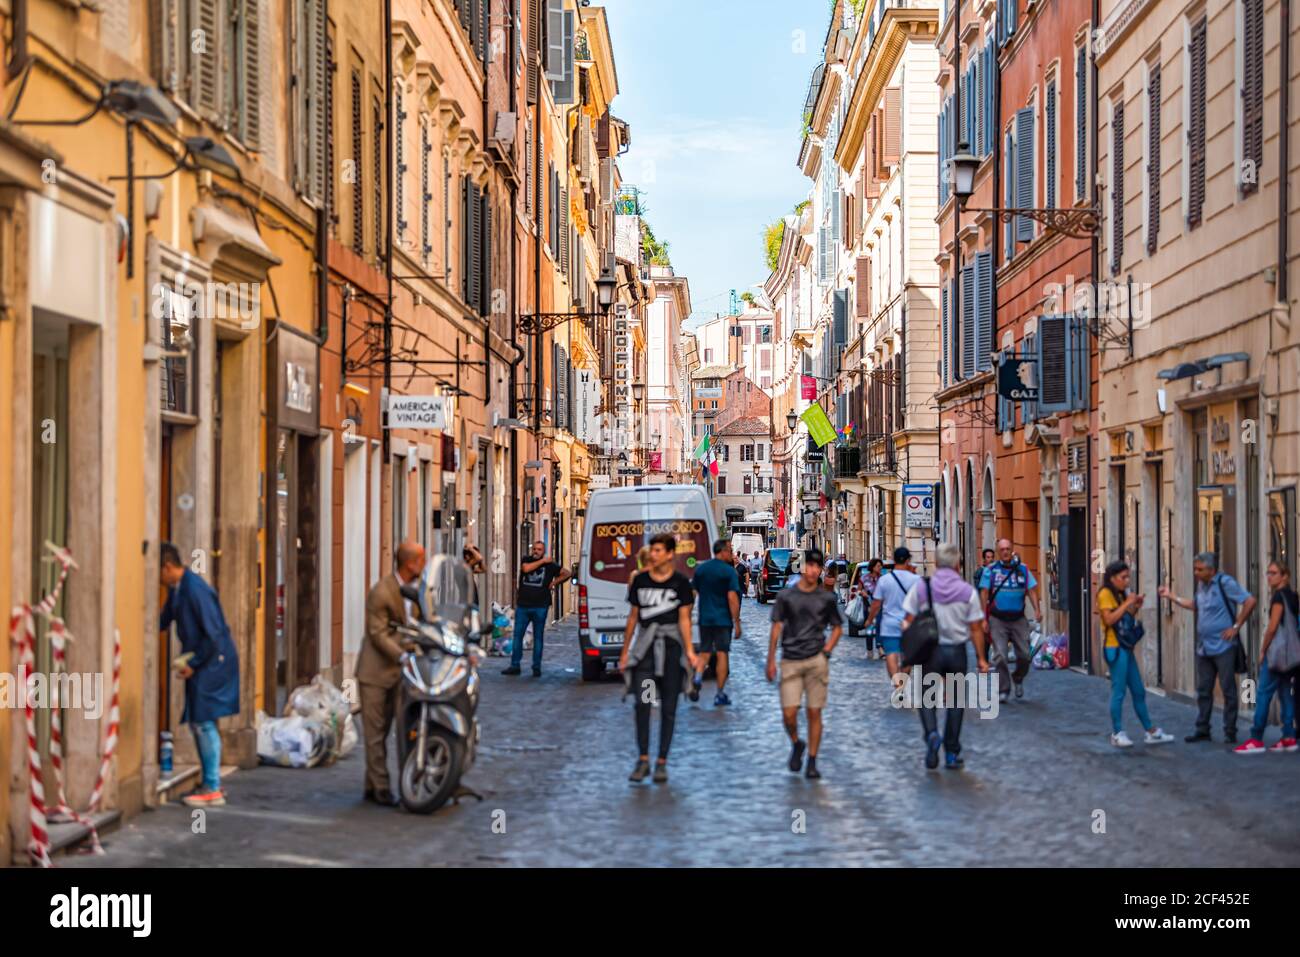 Rome, Italy - September 4, 2018: Narrow city town road Via Frattina street with signs for stores shops restaurants and people walking on sunny day Stock Photo